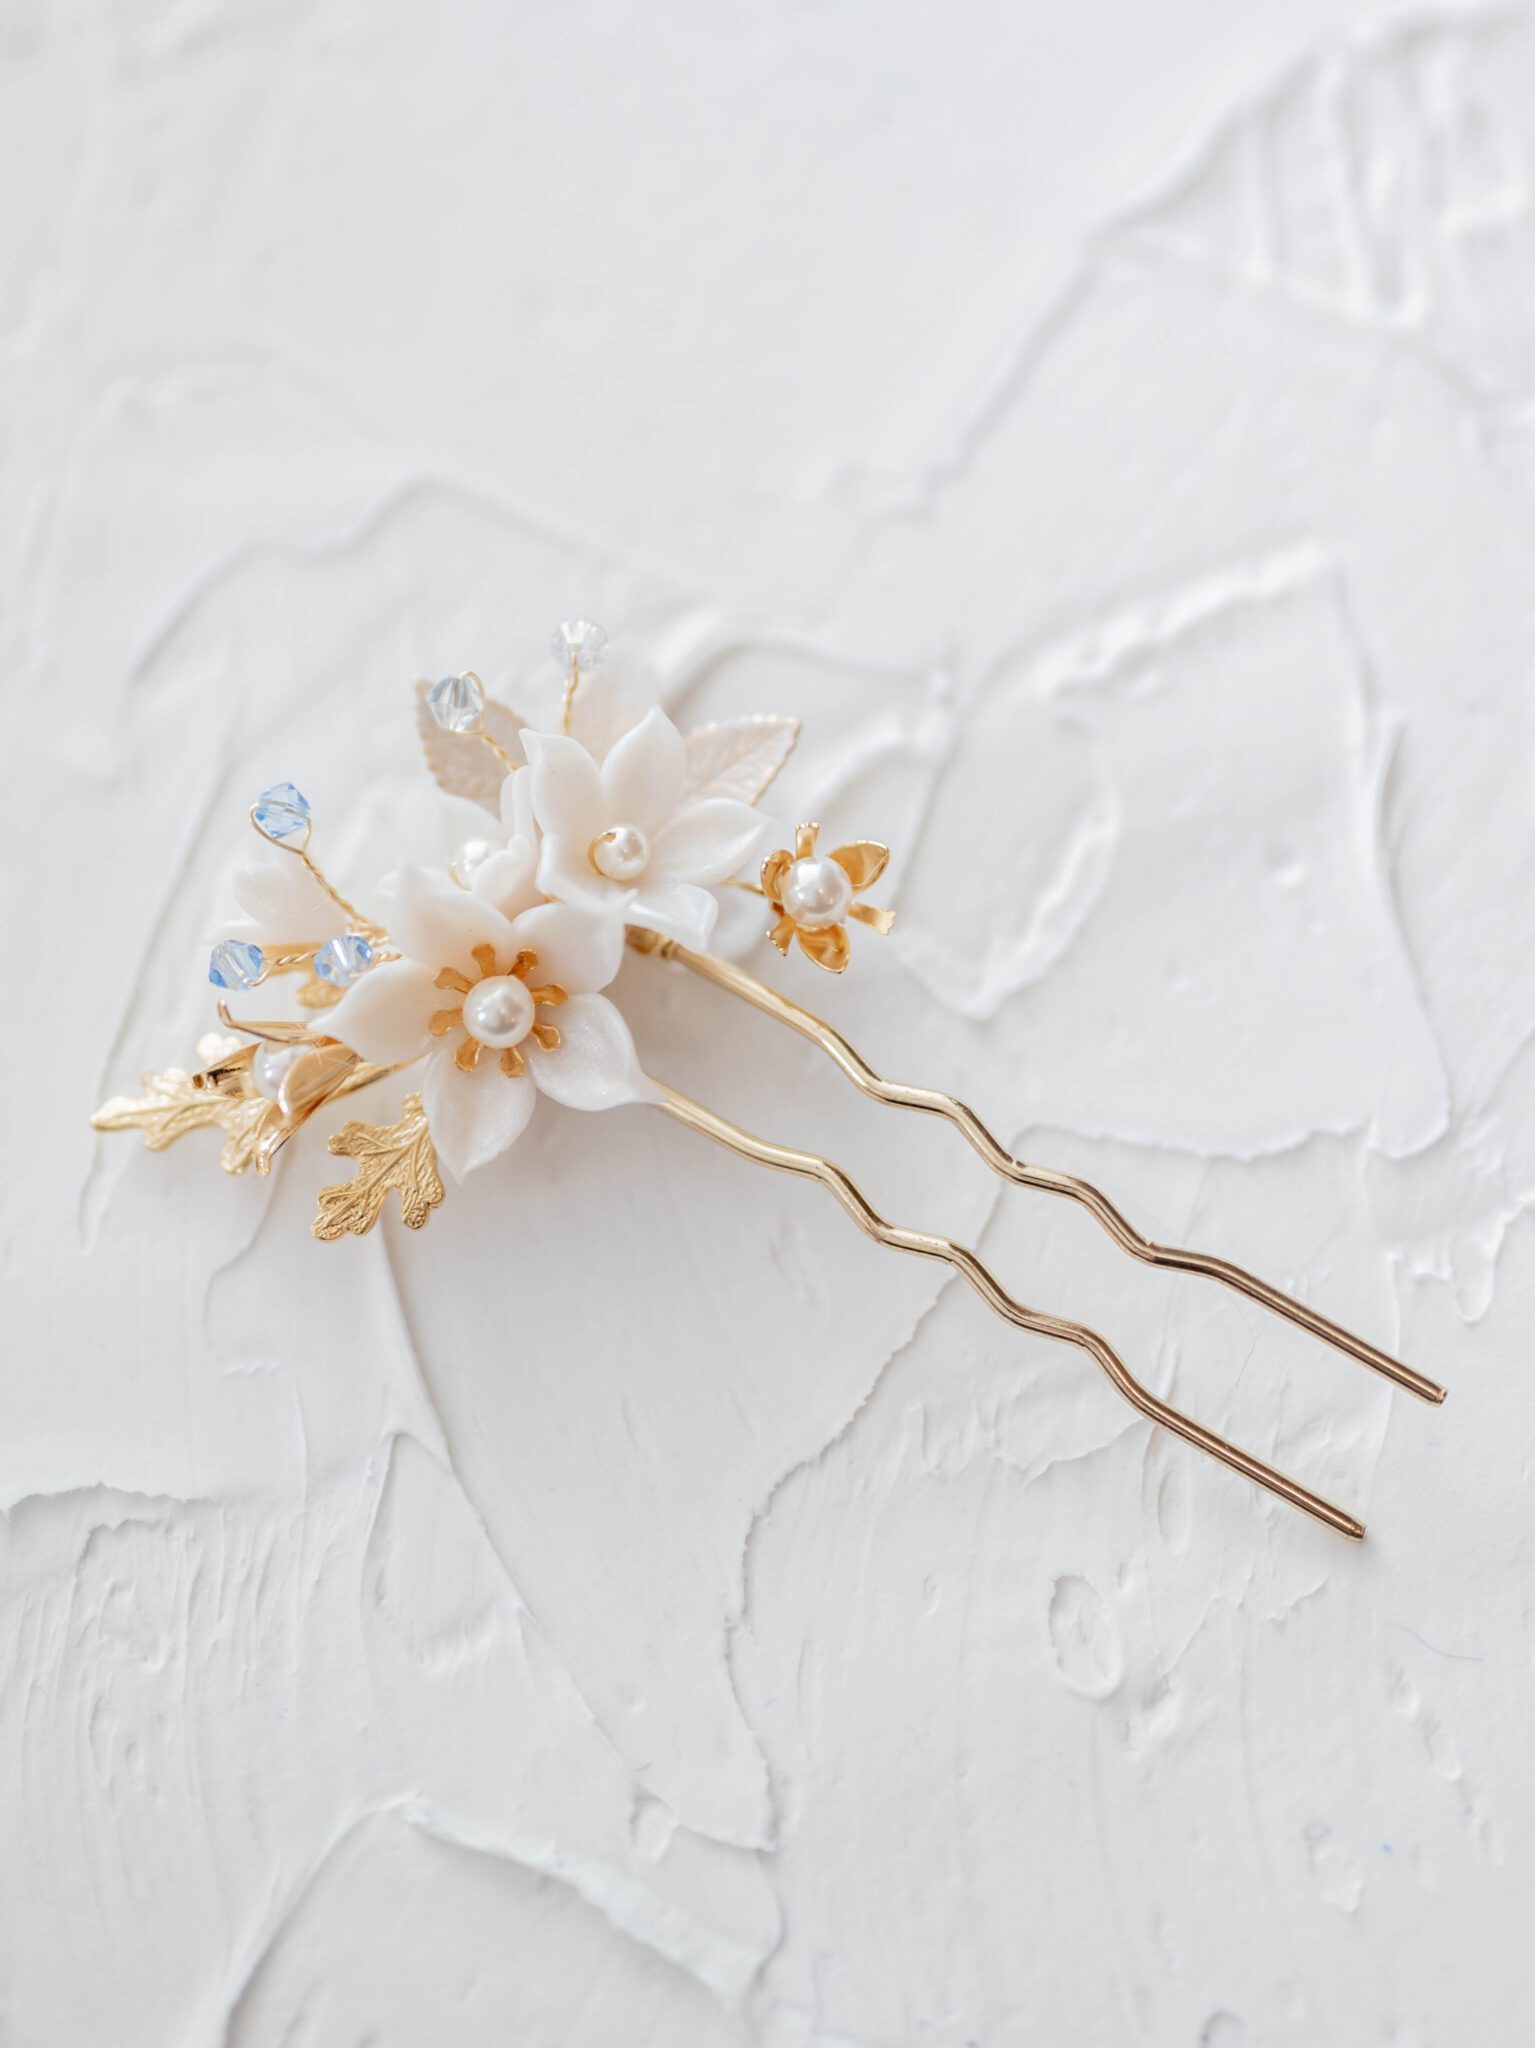 detailed photo of gold hair pin featuring white flowers, gold leaves and small baby blue accents, flat lay photography using plaster background, something blue bridal hair accessory inspiration